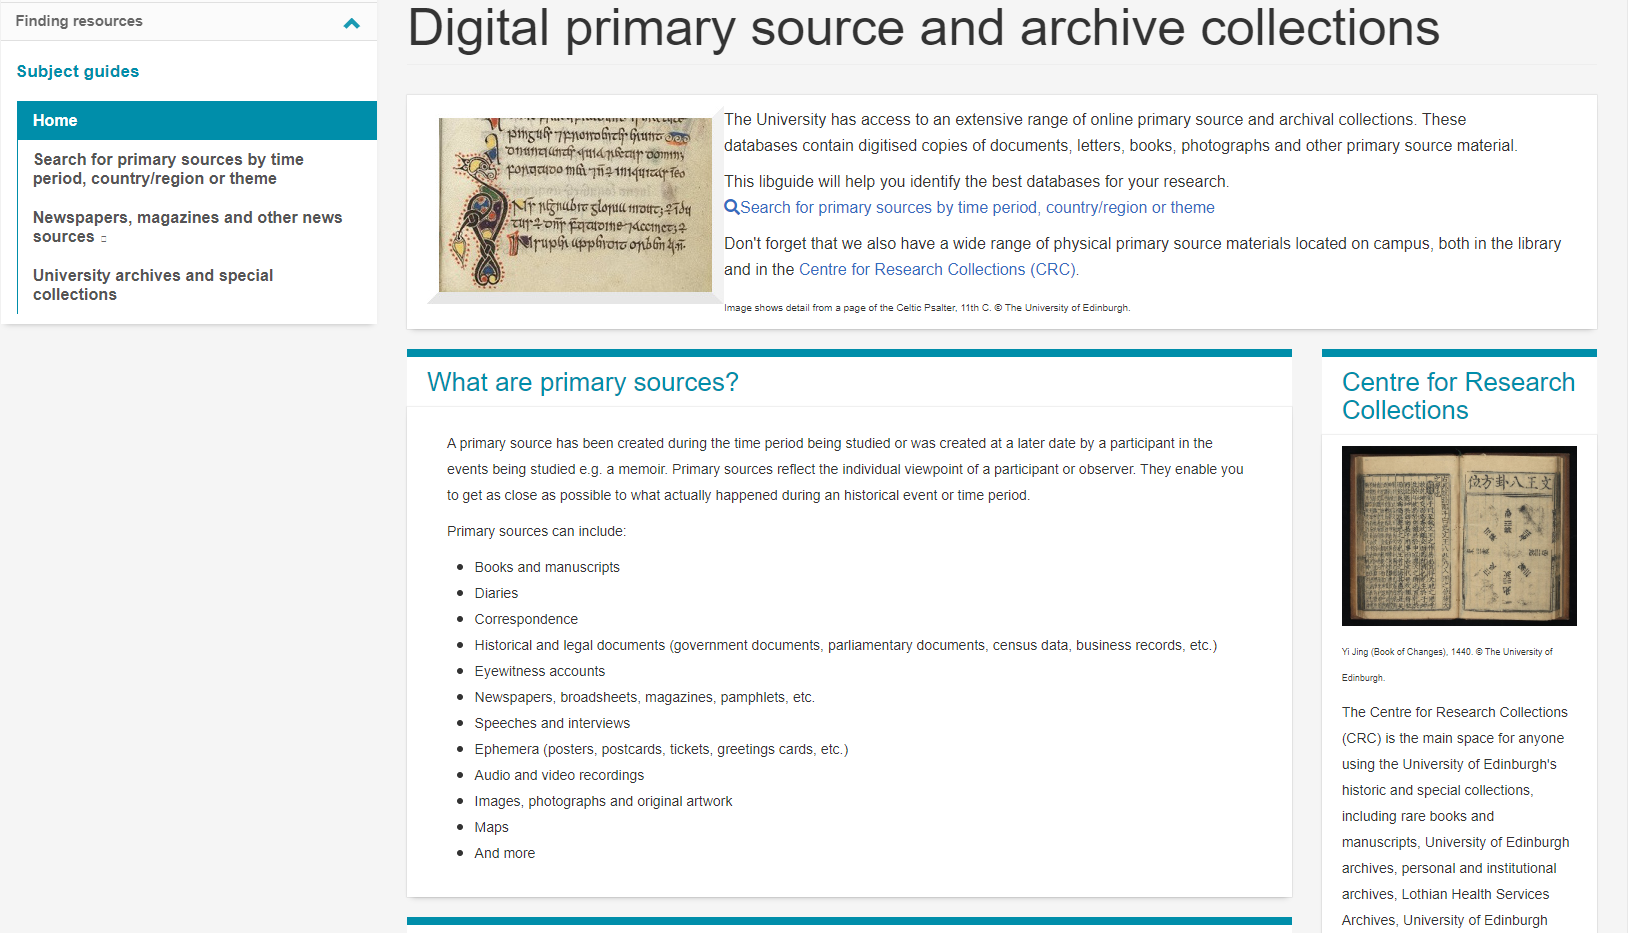 dissertation as primary source